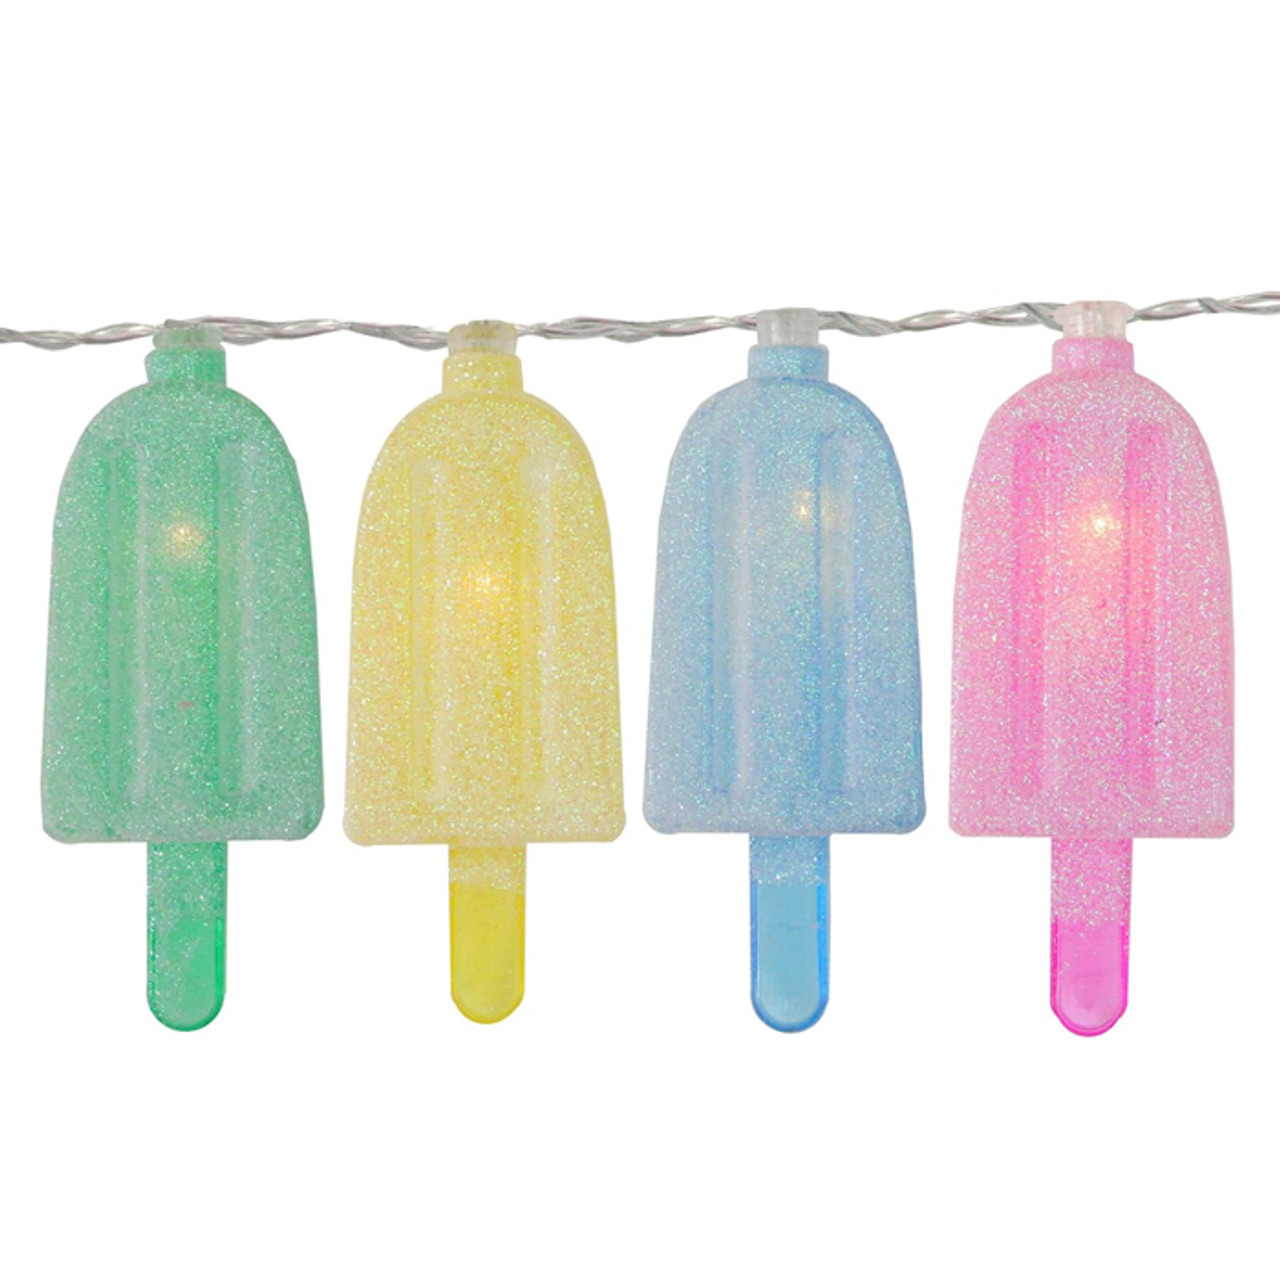 String Ice-Cream Multicolour LED 10 Pieces Battery Operated 120cm